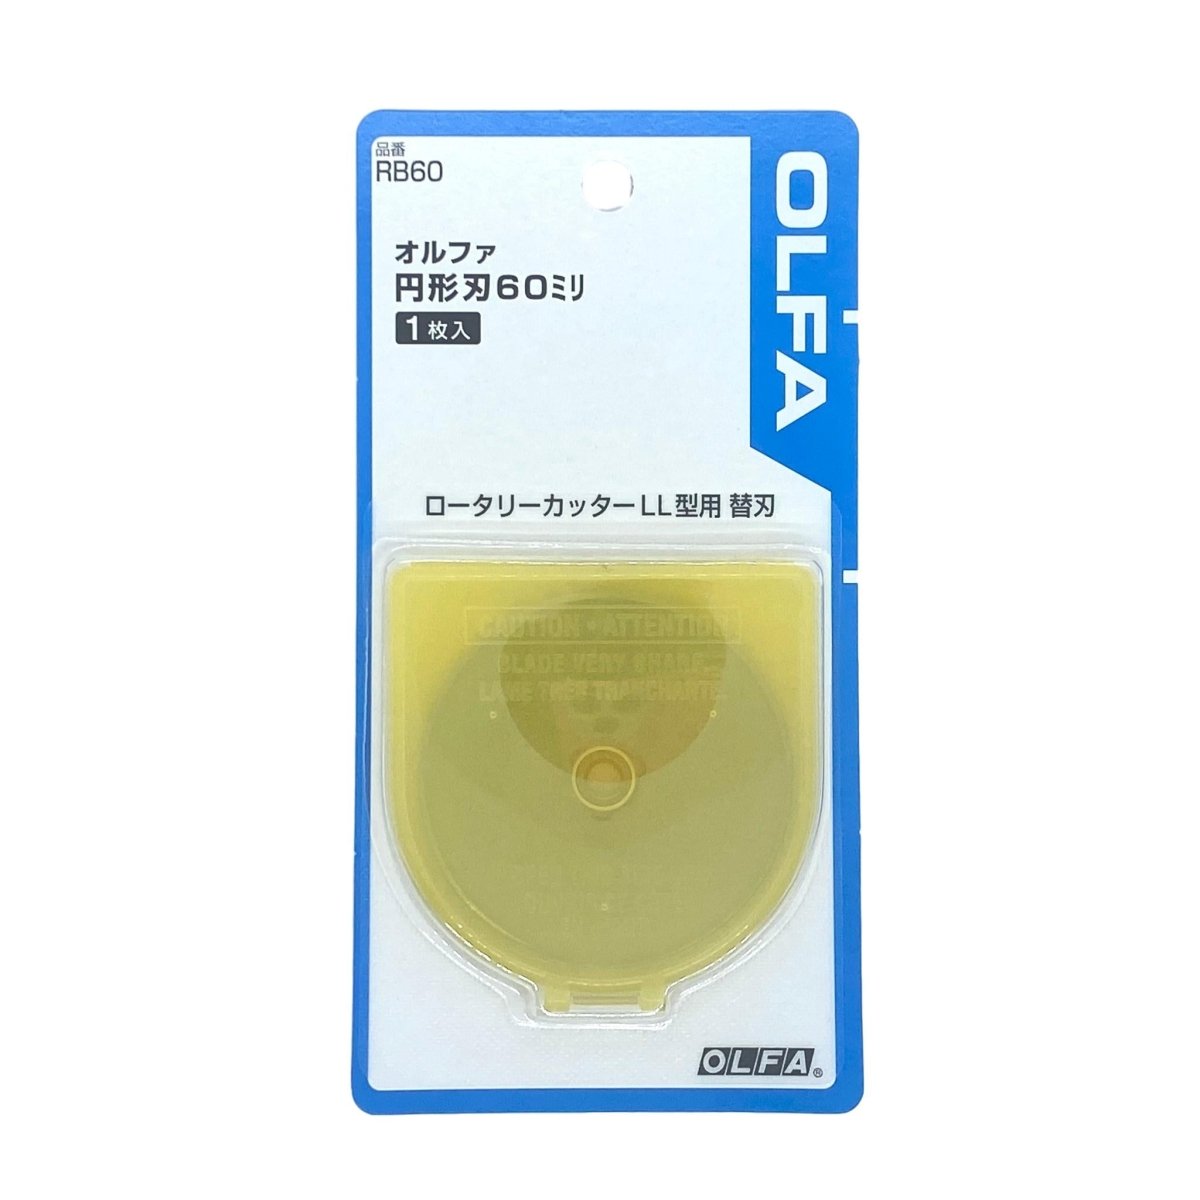 Olfa - Rotary Cutter Spare Blade - 60 mm - Sewing Gem